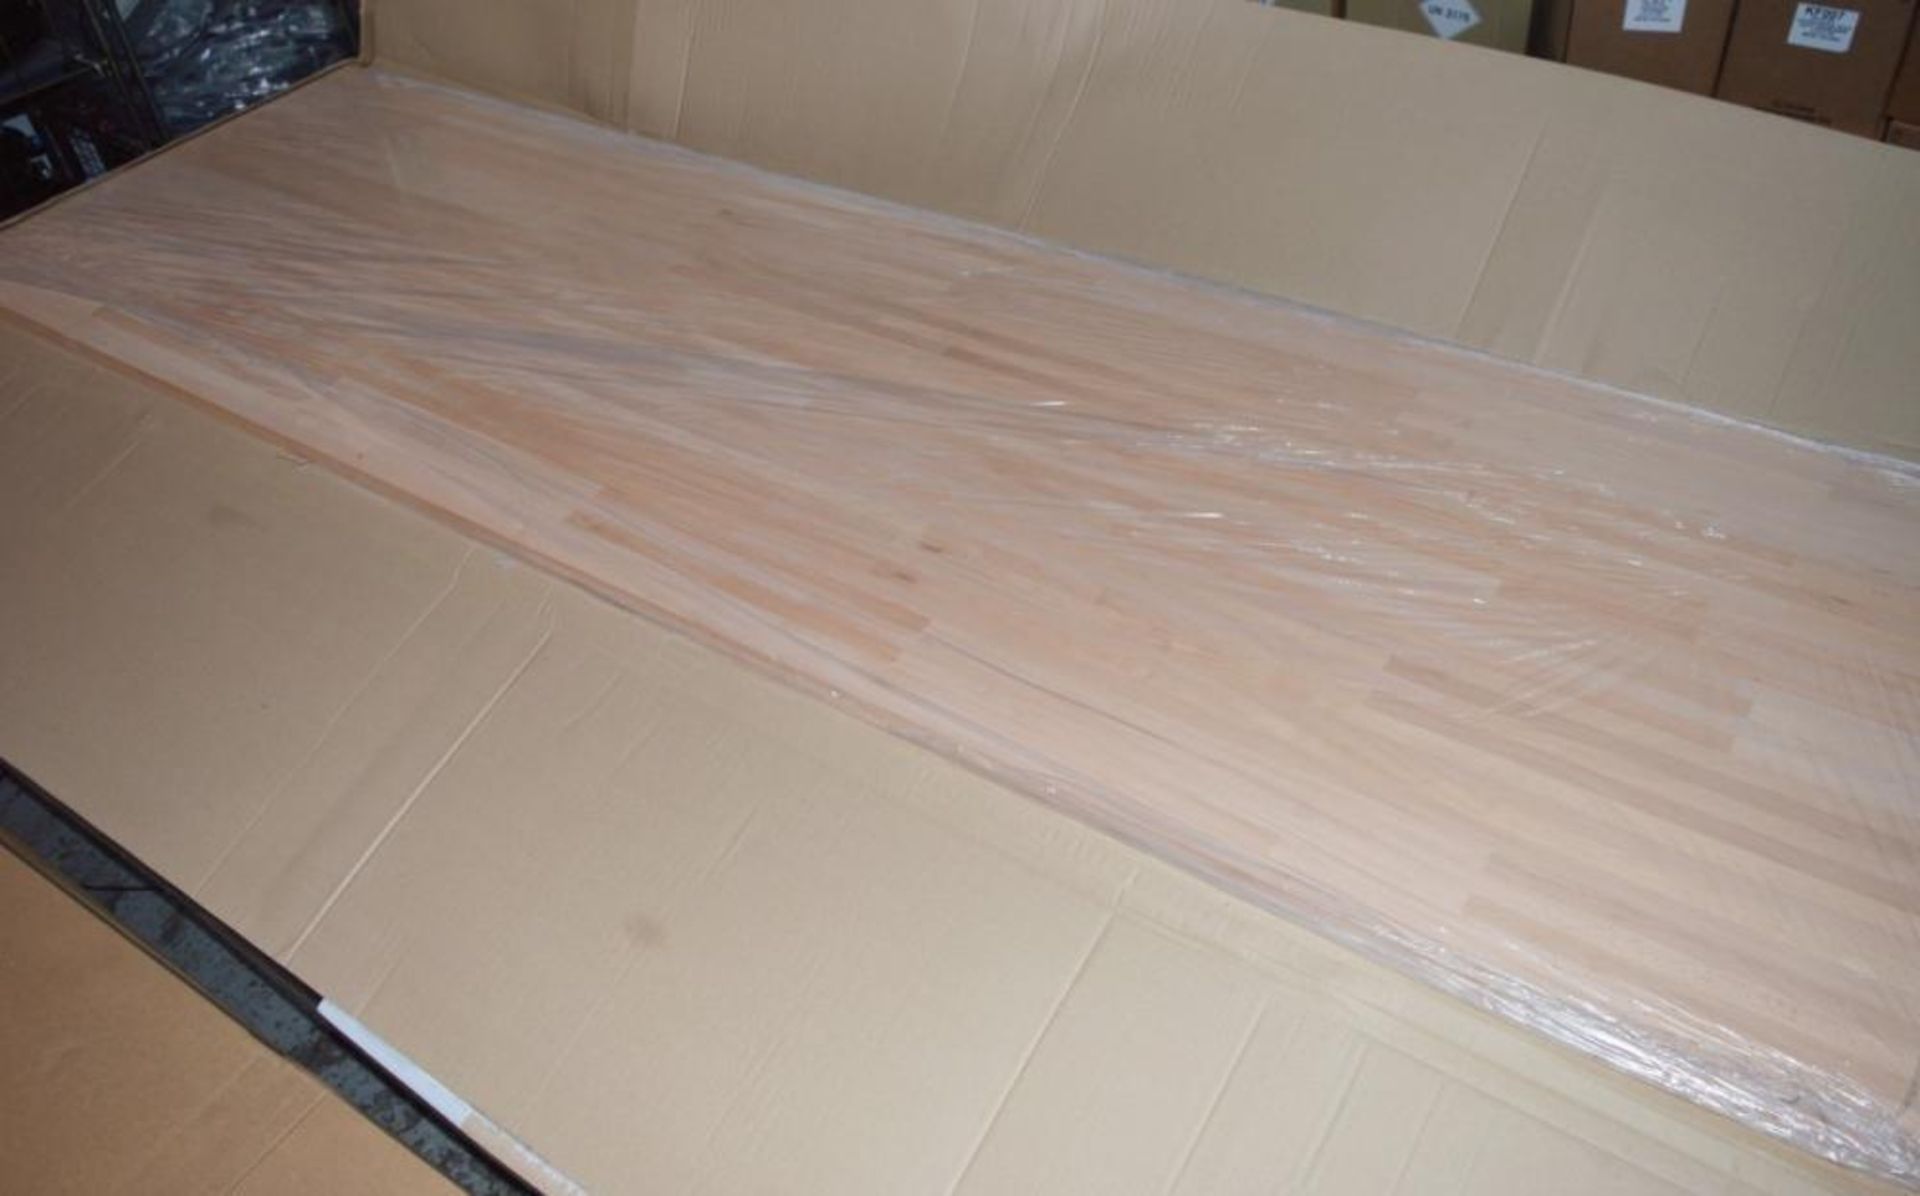 4 x Solid Wood Kitchen Worktops - PRIME BEECH - First Grade Finger Jointed Kitchen Worktop - Size: - Image 3 of 4